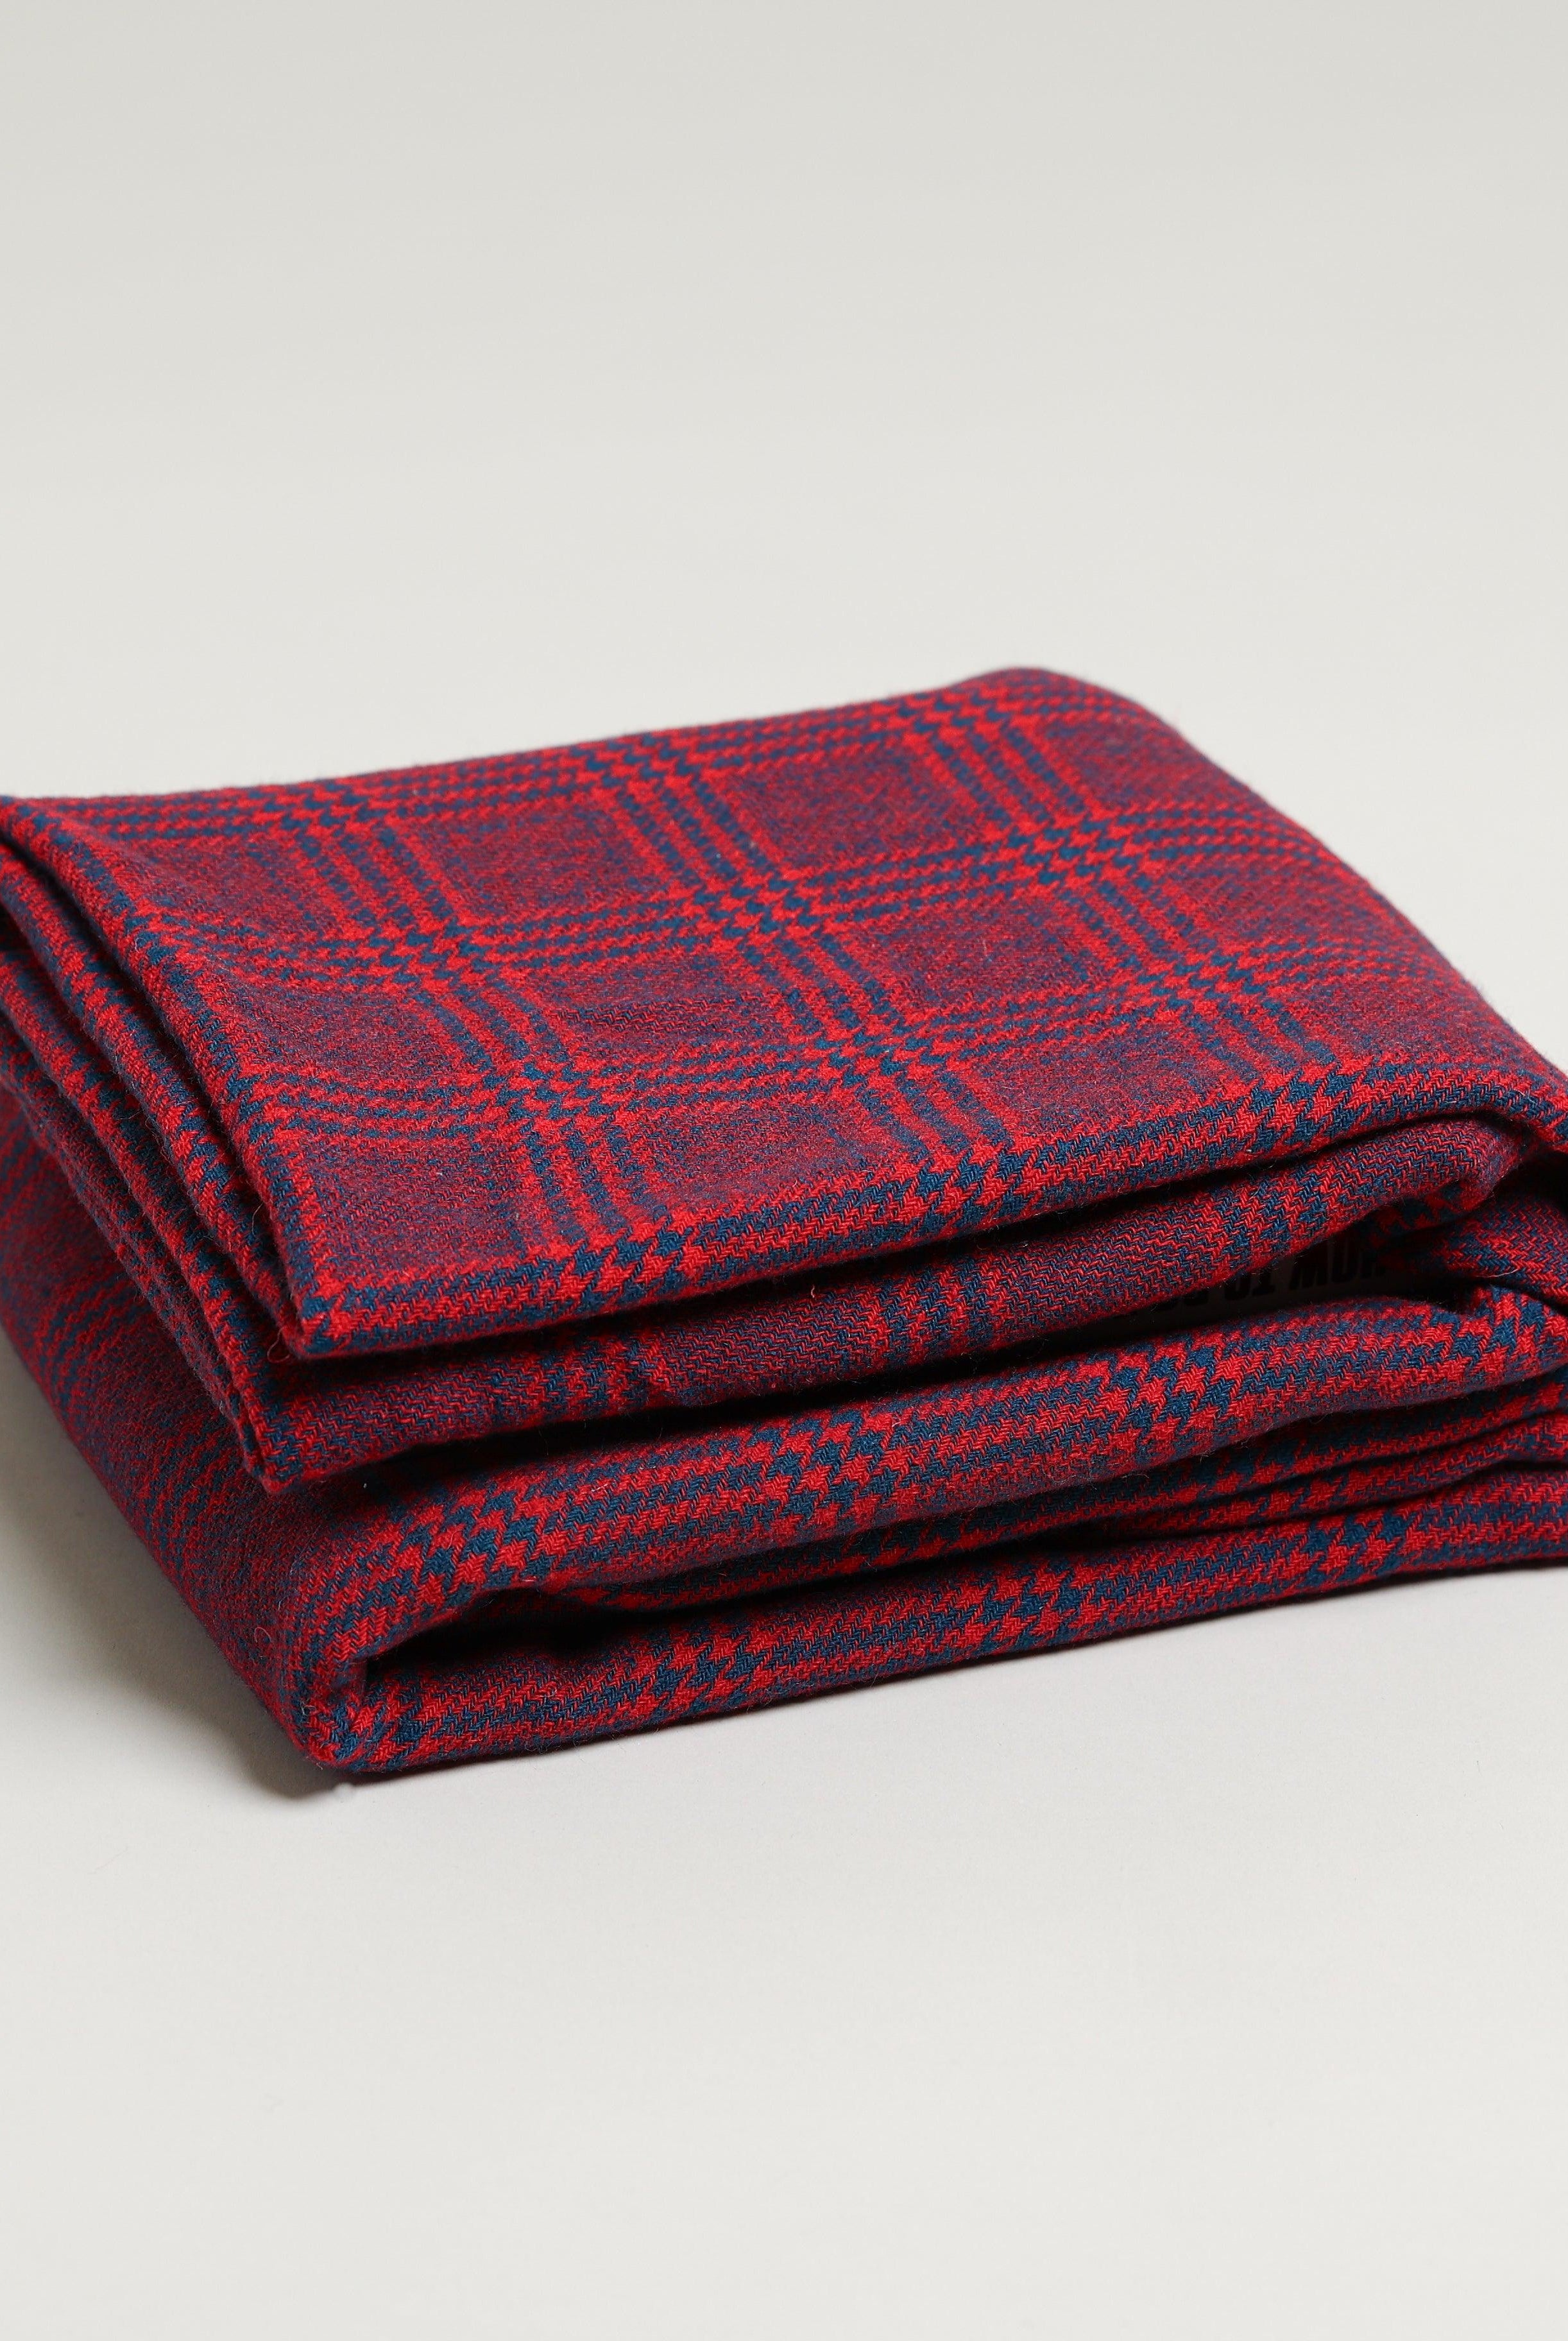 Navy and red throw blanket 